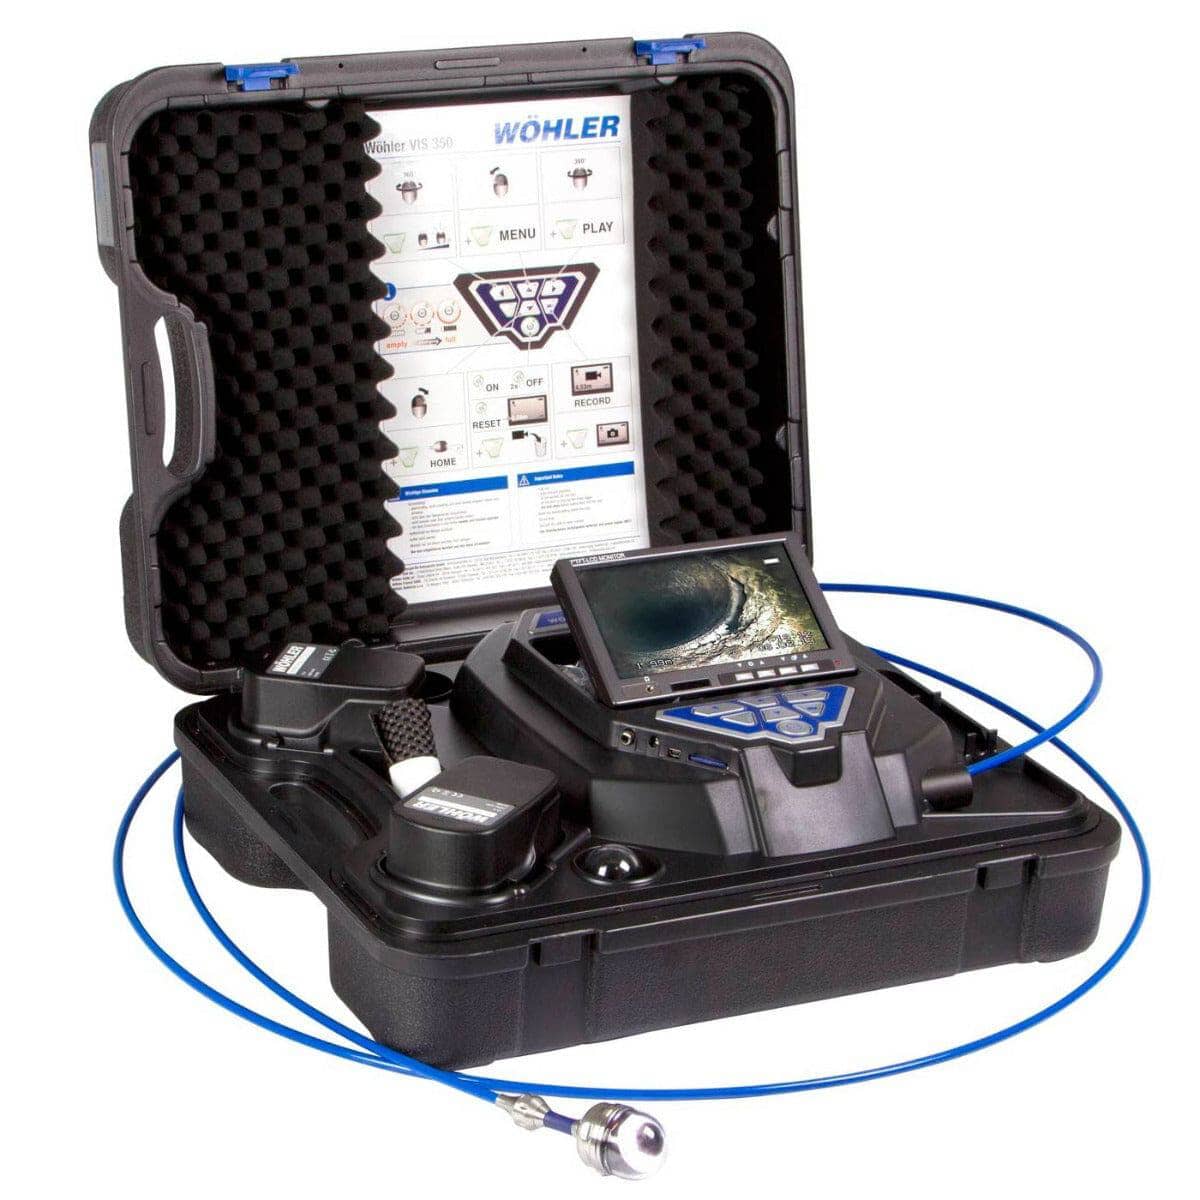 Wohler VIS 350 PLUS Inspection System w/ 1.5" and 1" Camera Head - 8927 - InterTest, Inc.